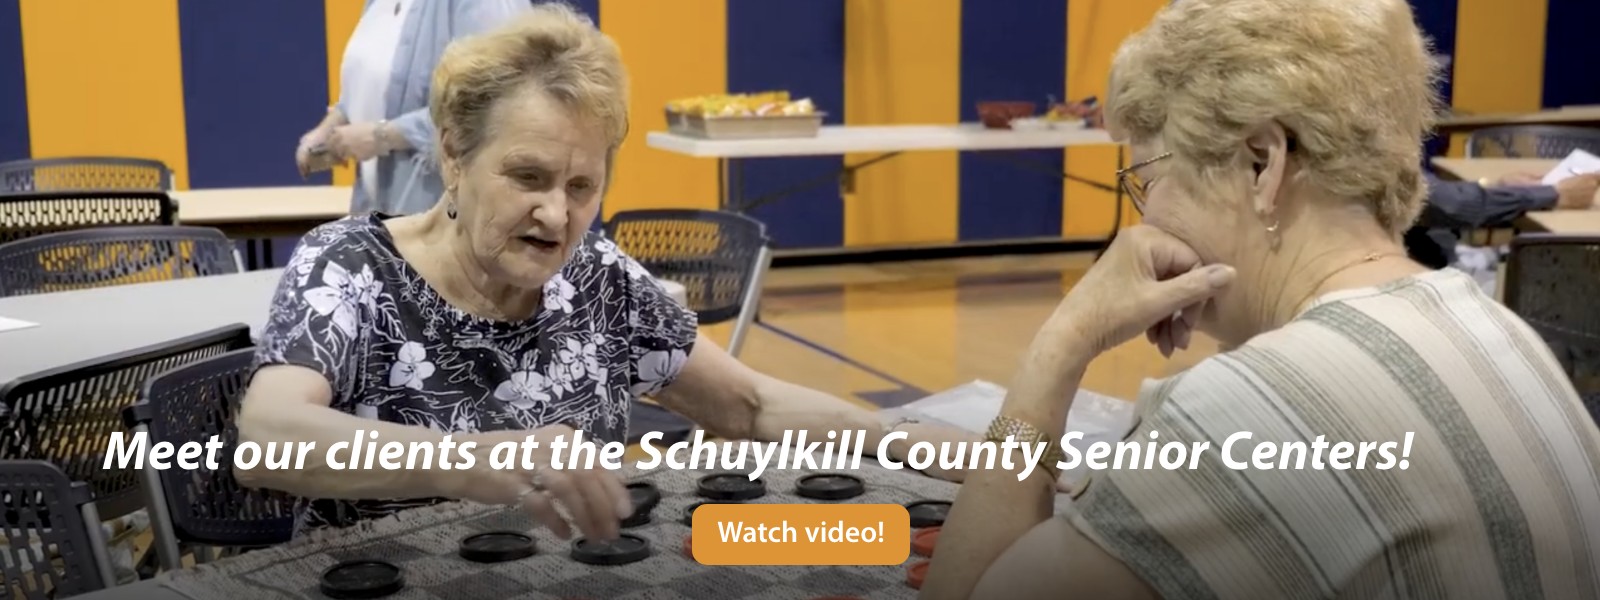 Meet our clients at the Schuylkill County Senior Centers video